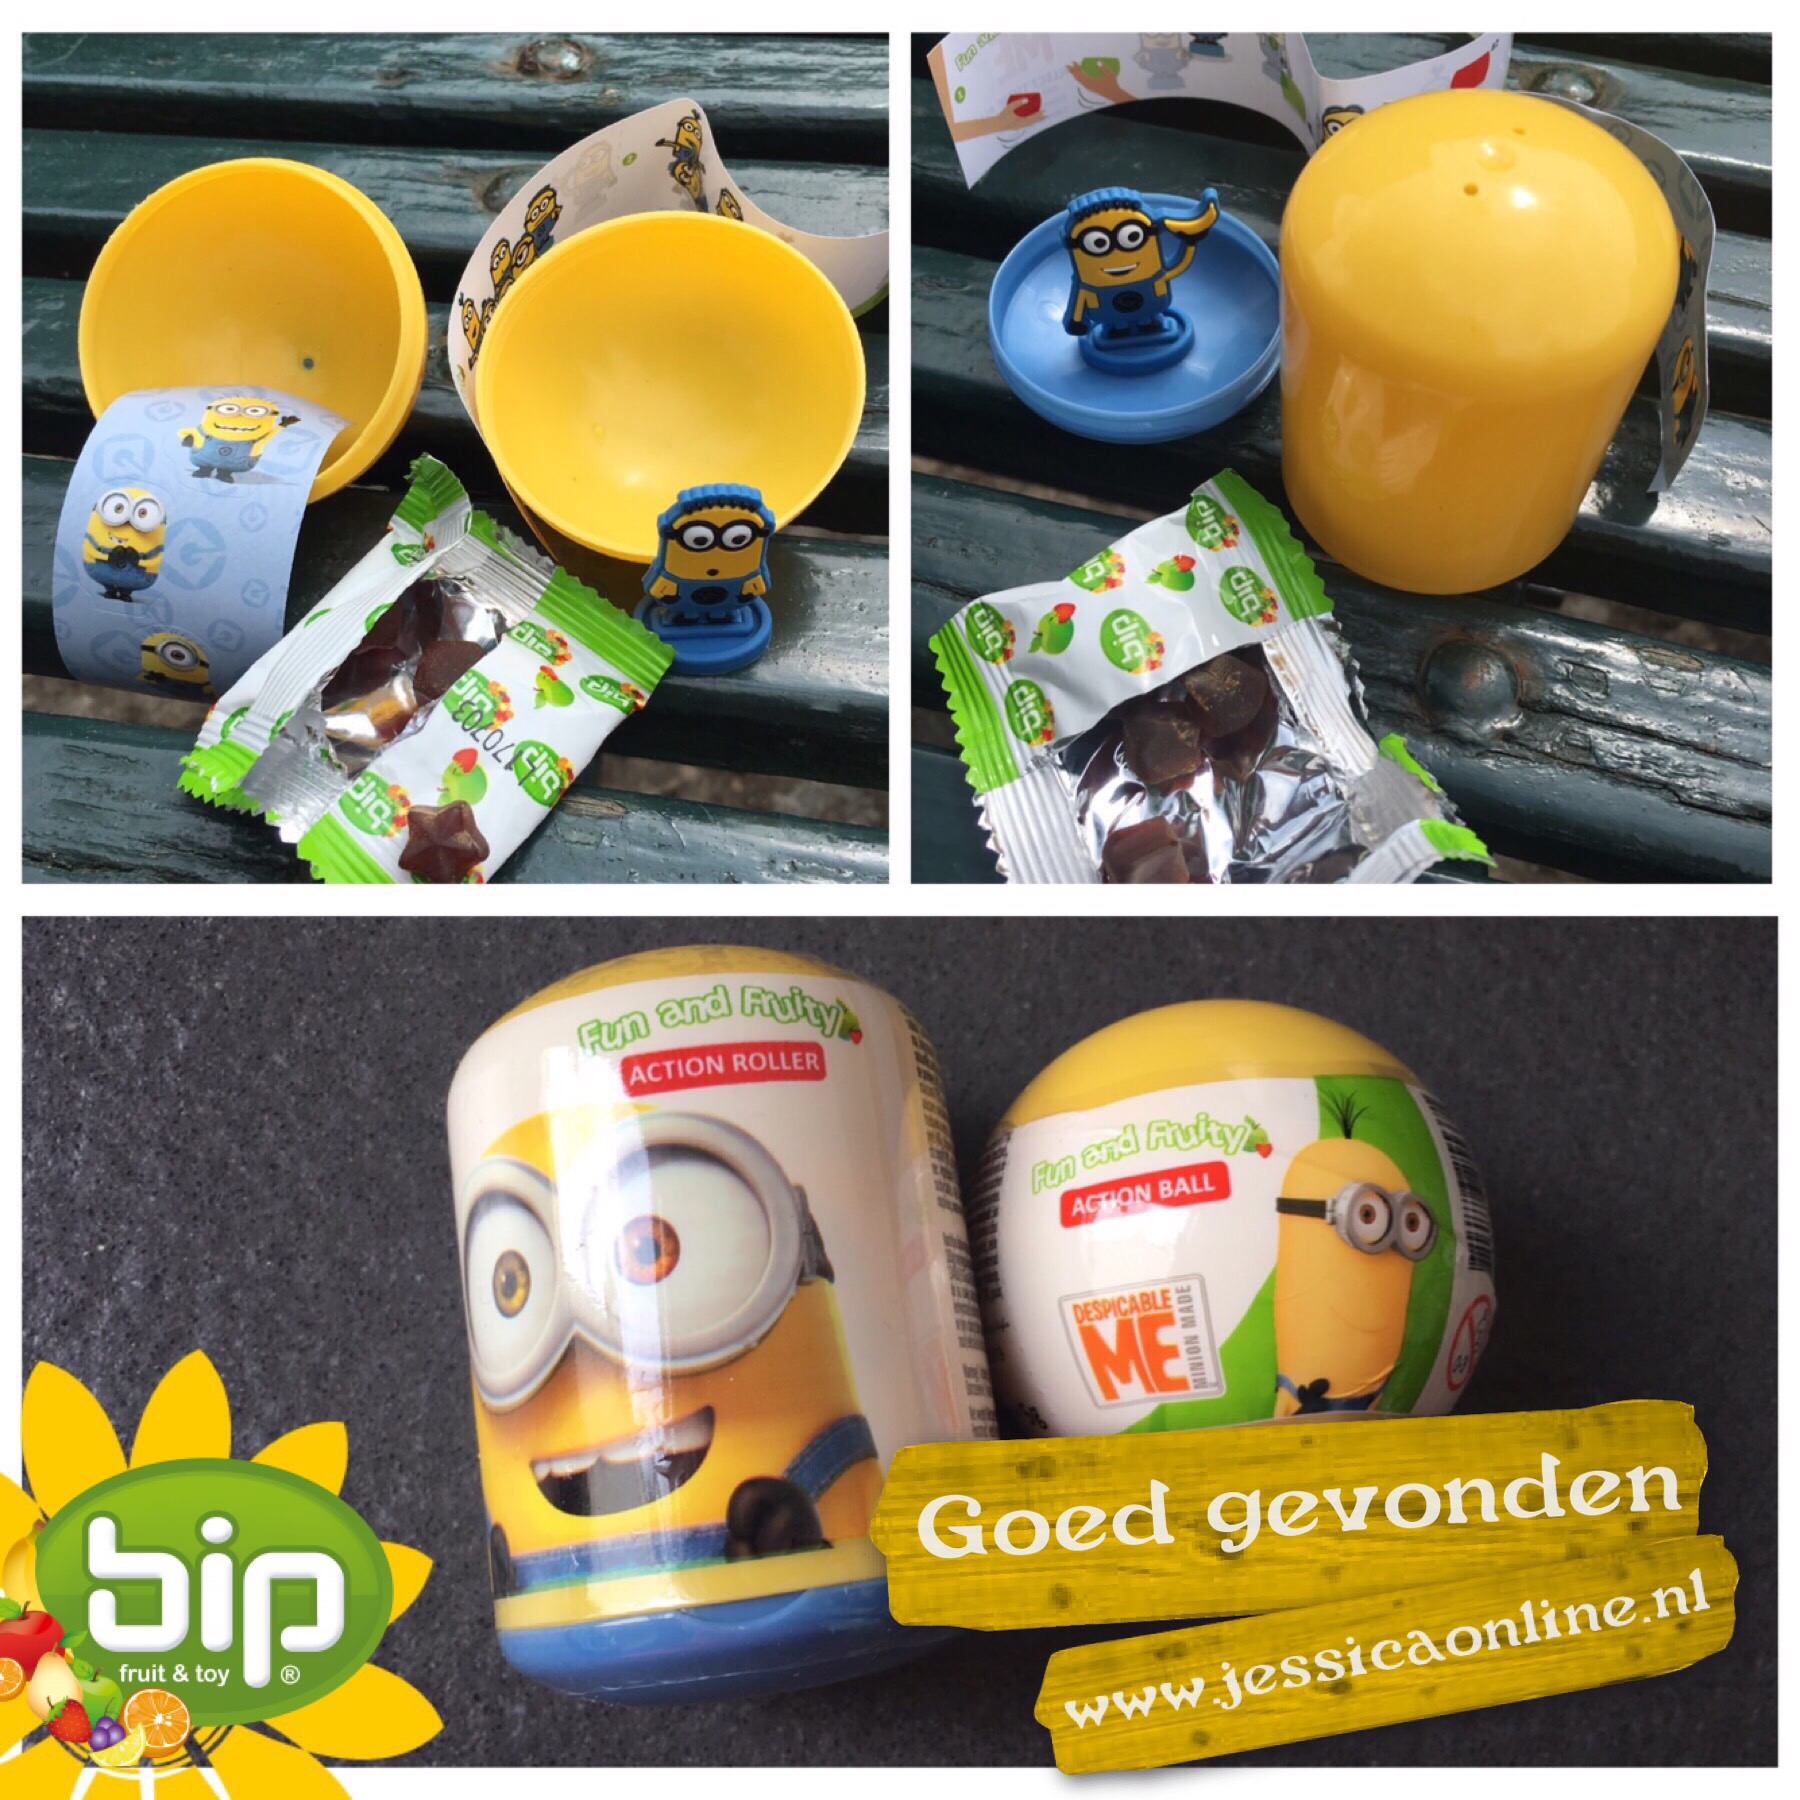 JessicaOnline.nl Bip Minions fruitrollers